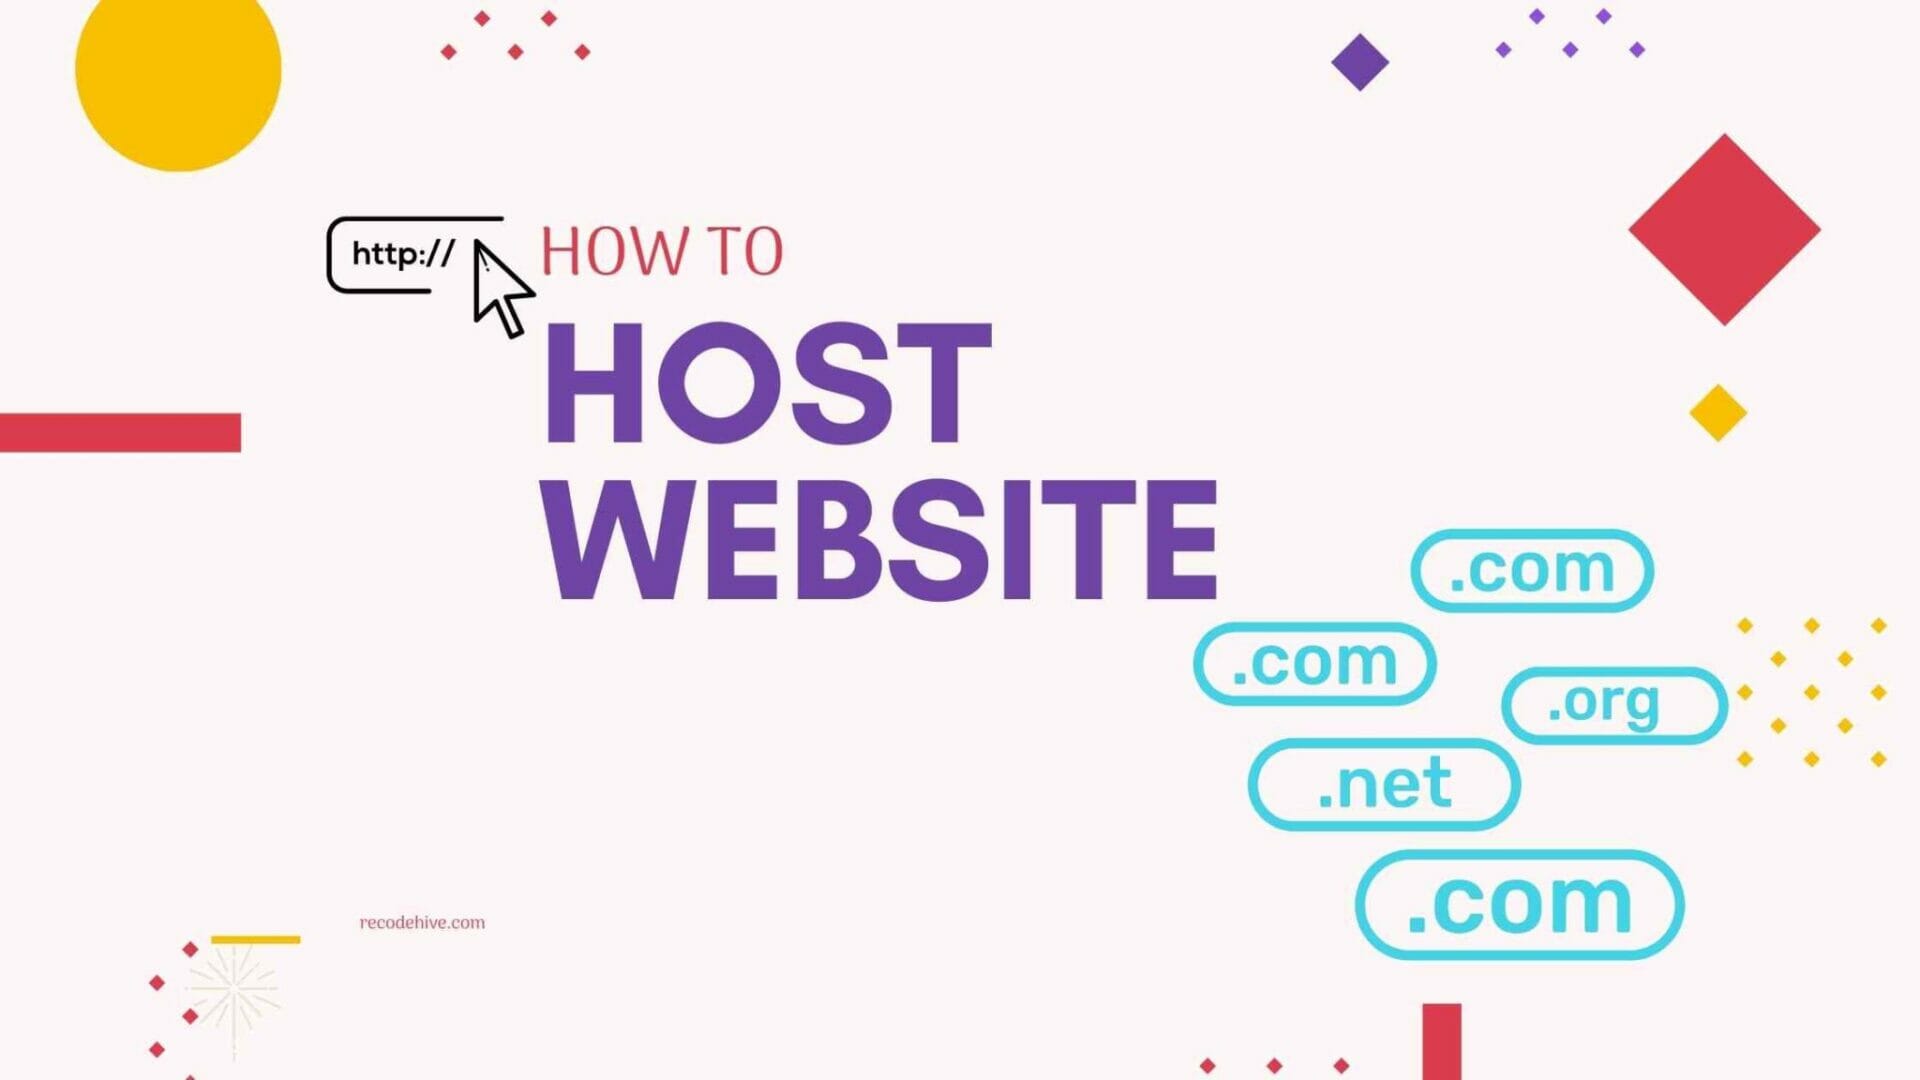 How to host a website complete guide